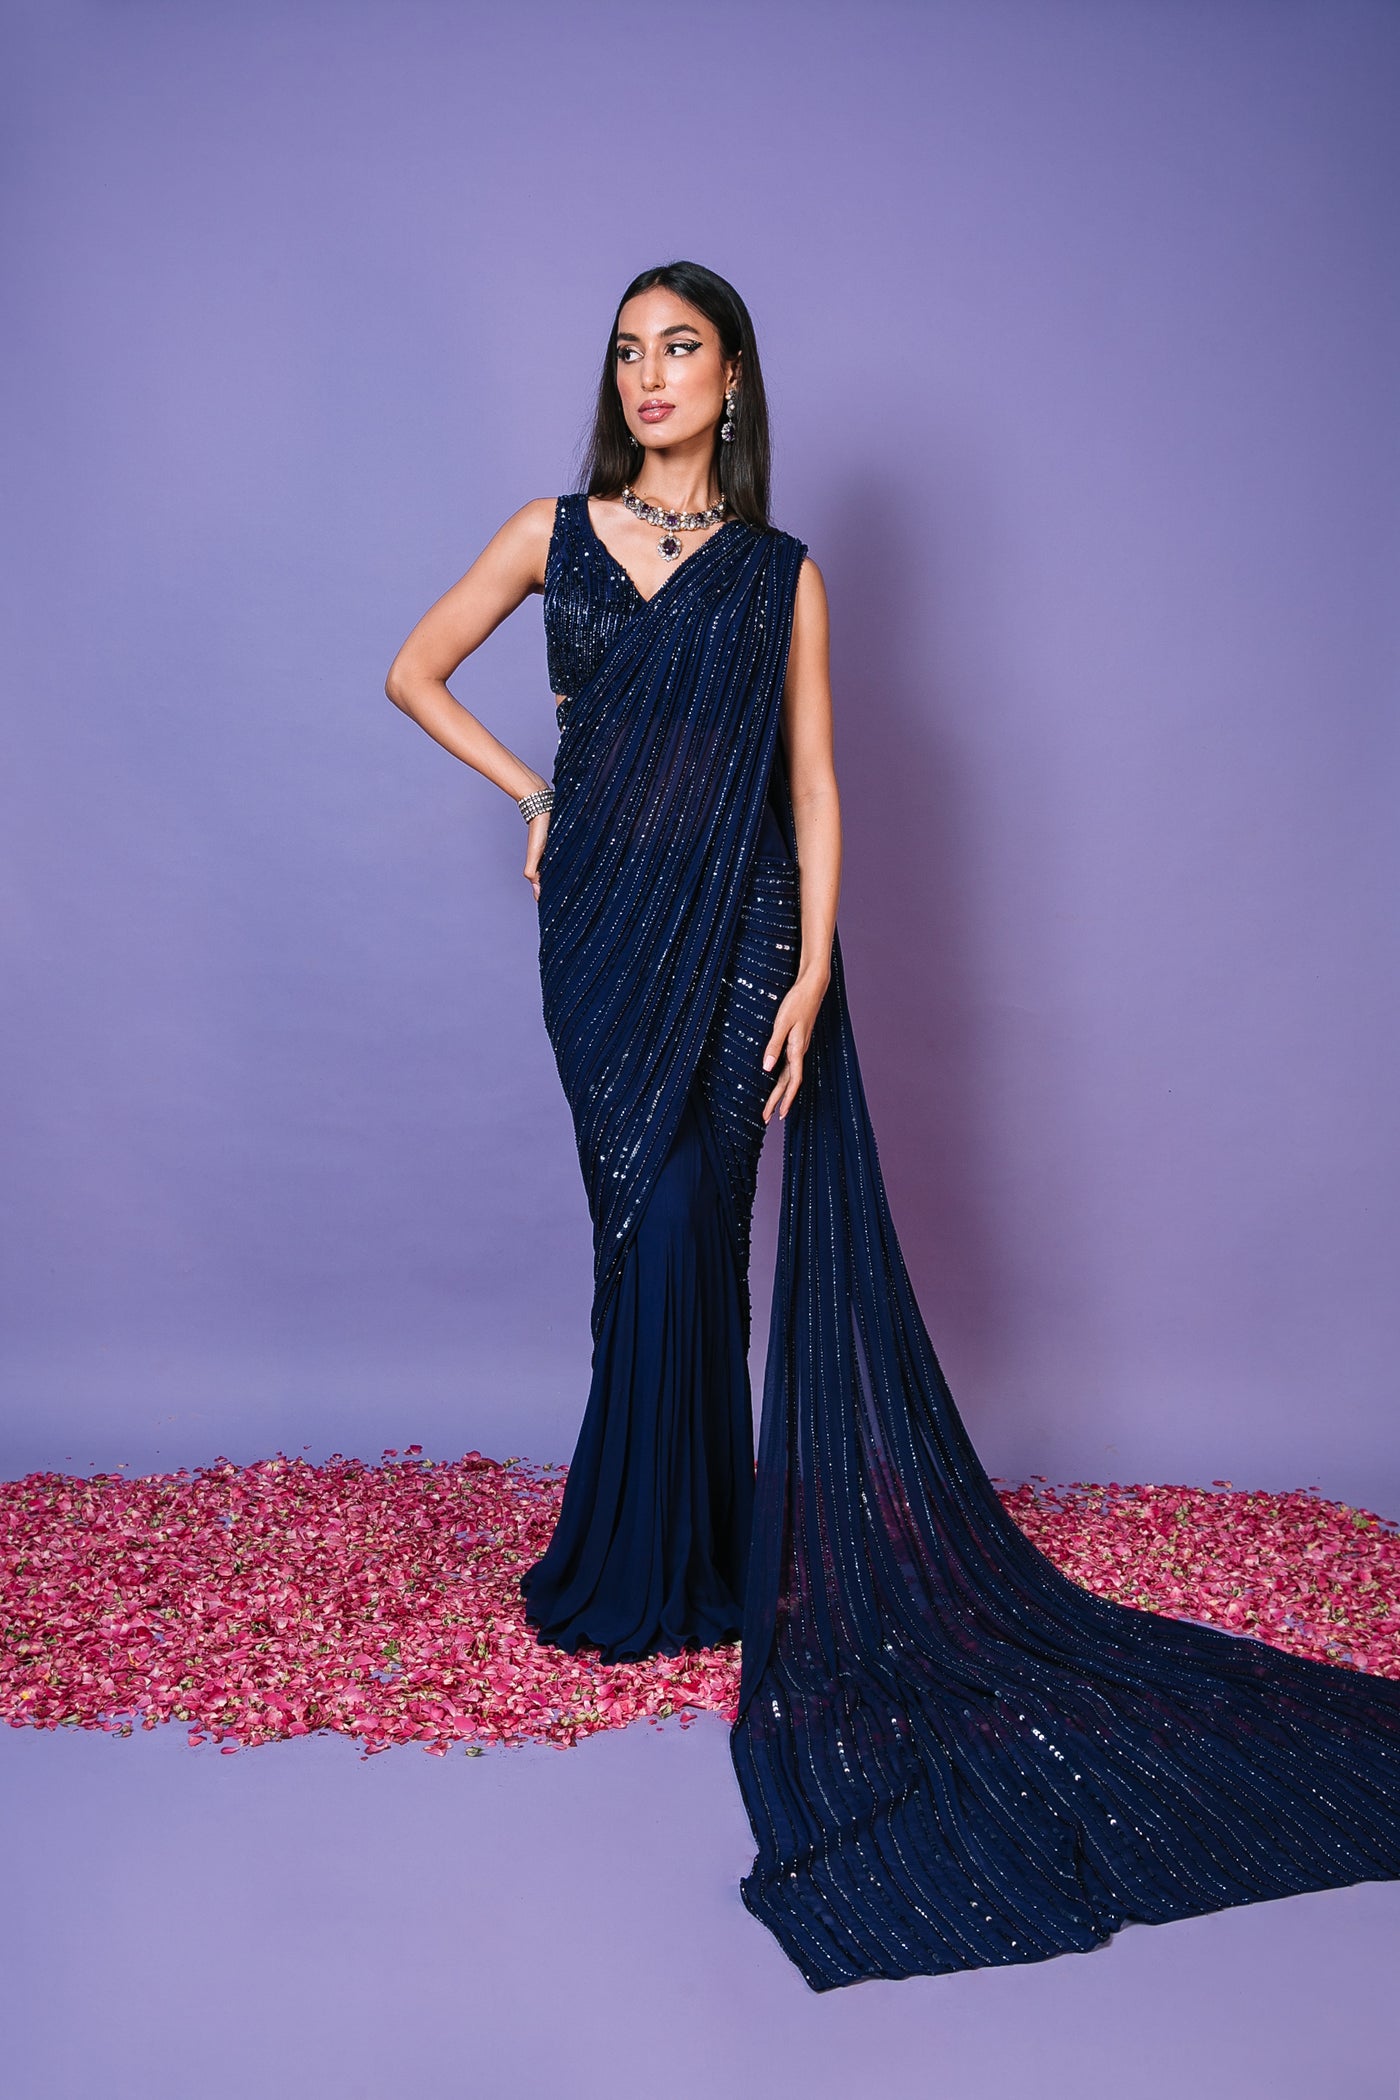 Amazon.com: WOMEN INDIAN DESIGNER READY TO WEAR GOWN SAREE PARTY FESTIVE  COCKTAIL WEDDING WEAR GIRLISH DRESS SARI BLOUSE 7684 (Black, 36) : Clothing,  Shoes & Jewelry